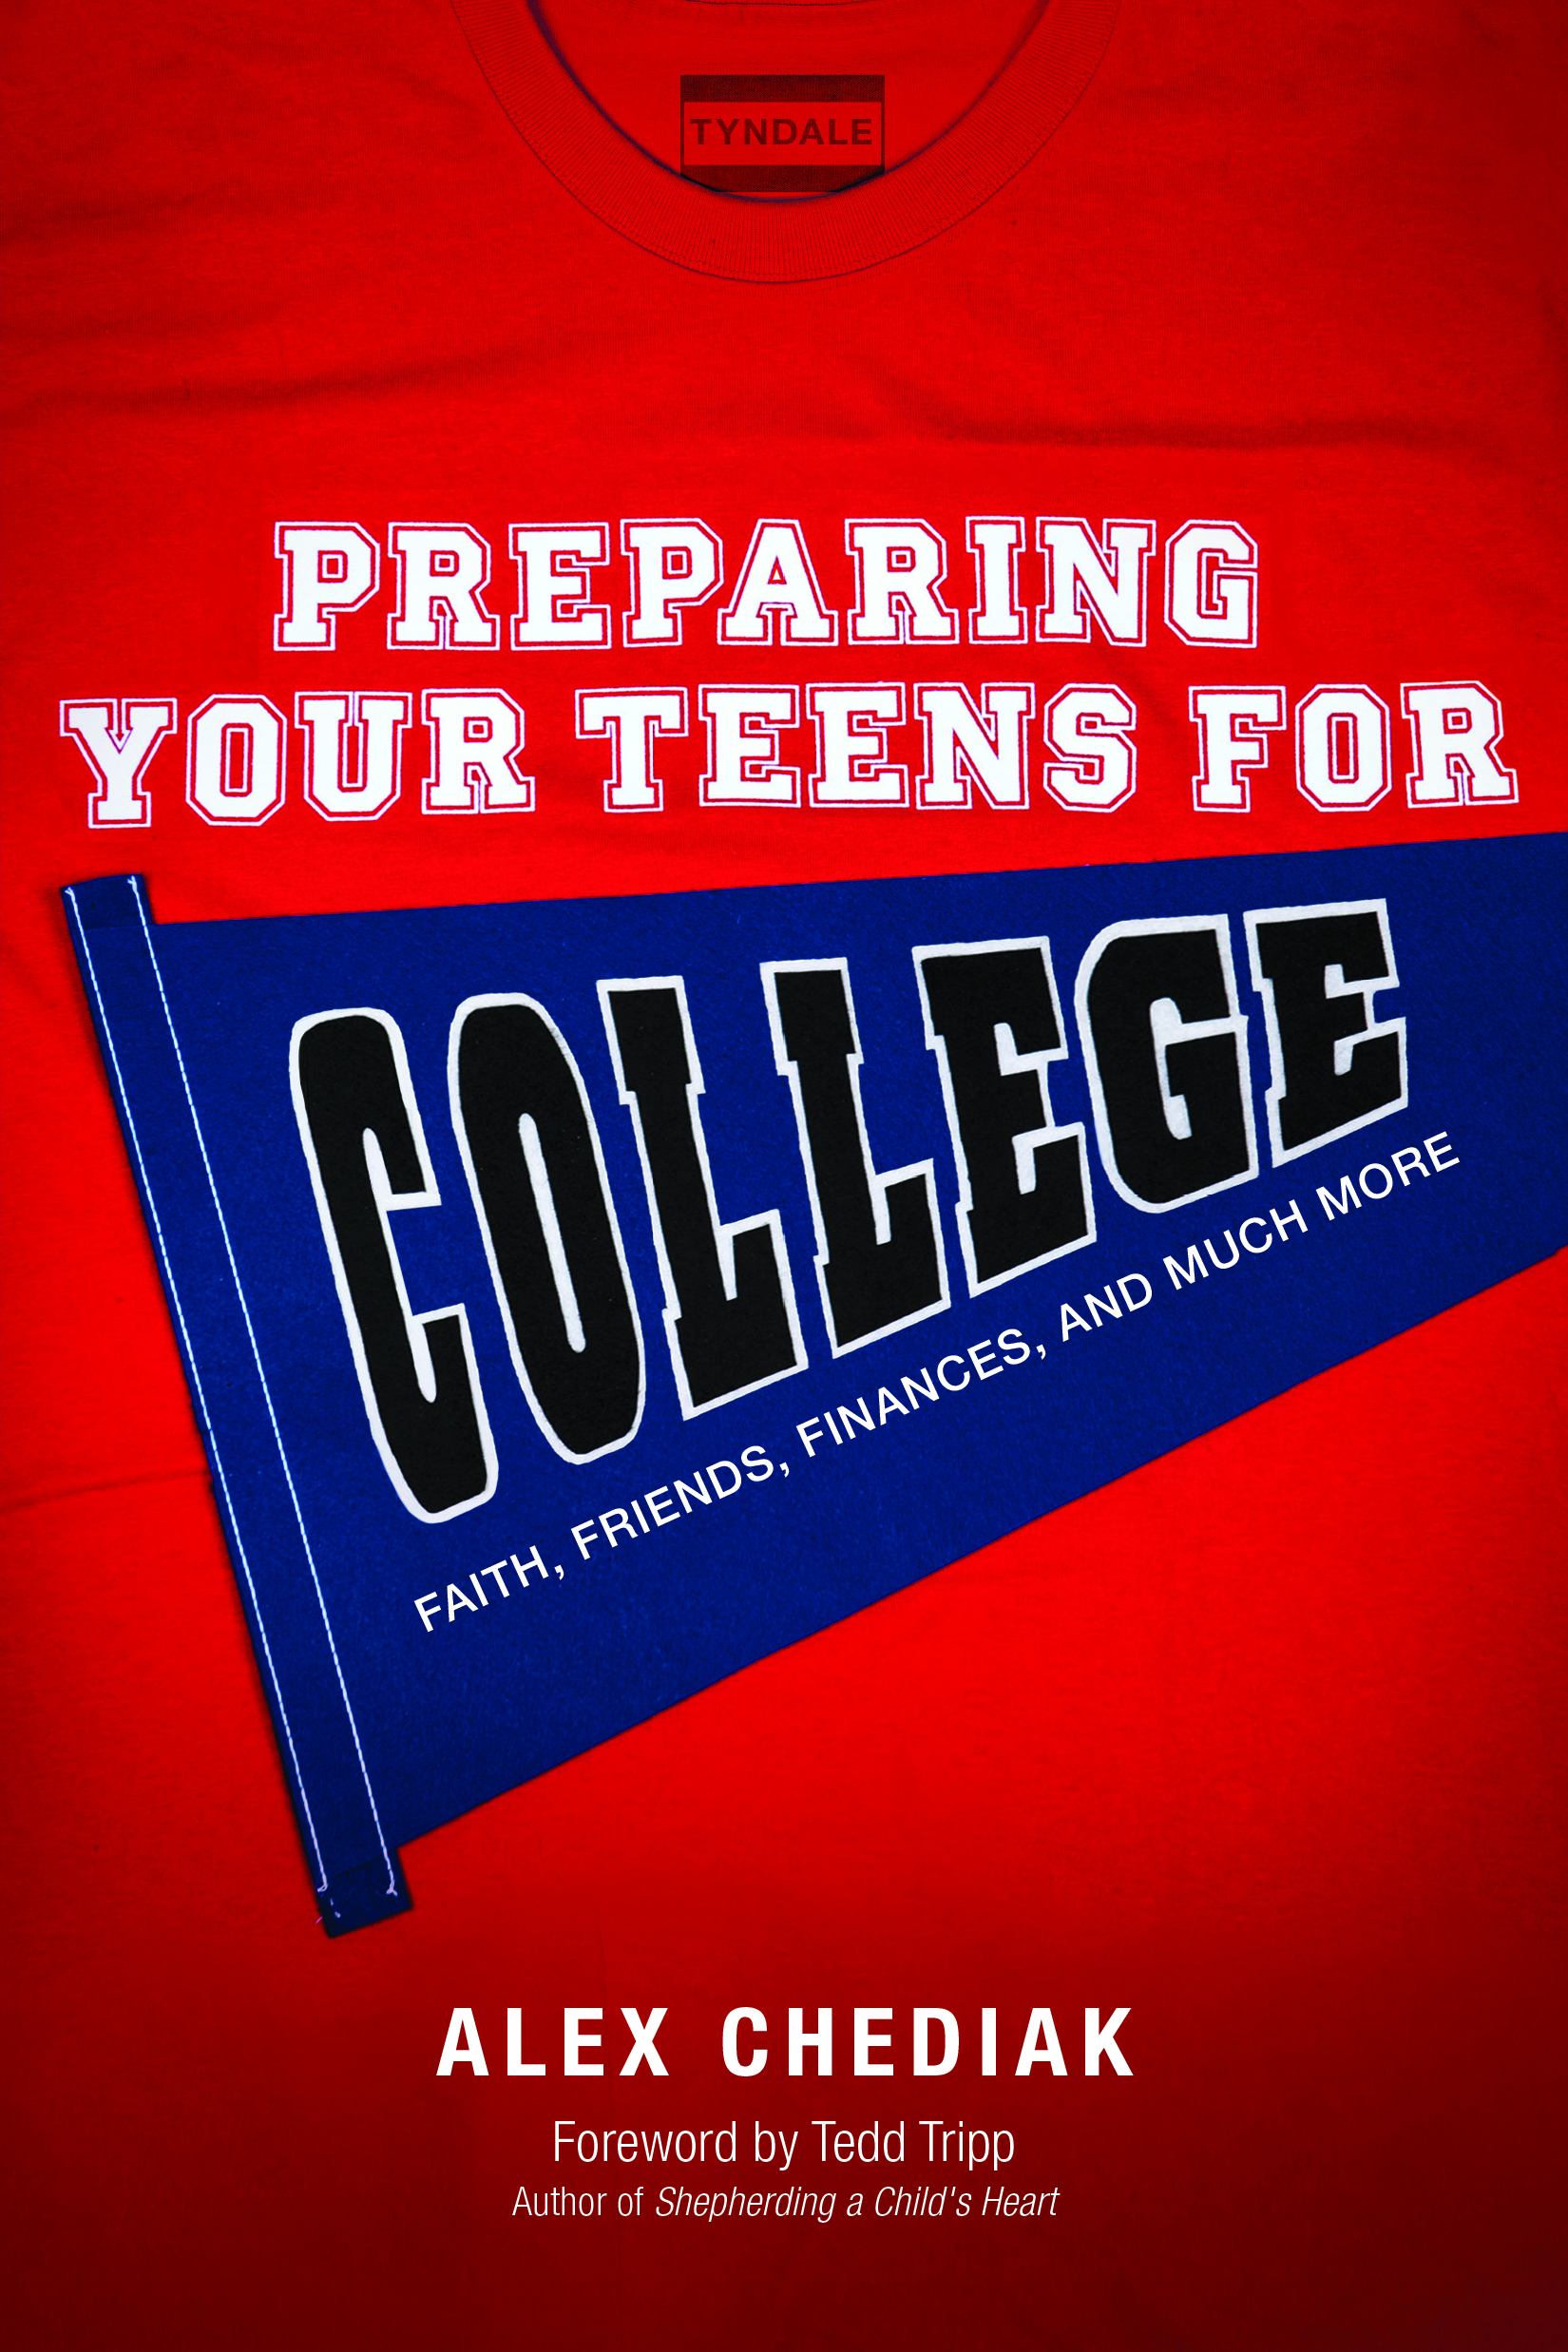 Preparing Your Teens for College book cover